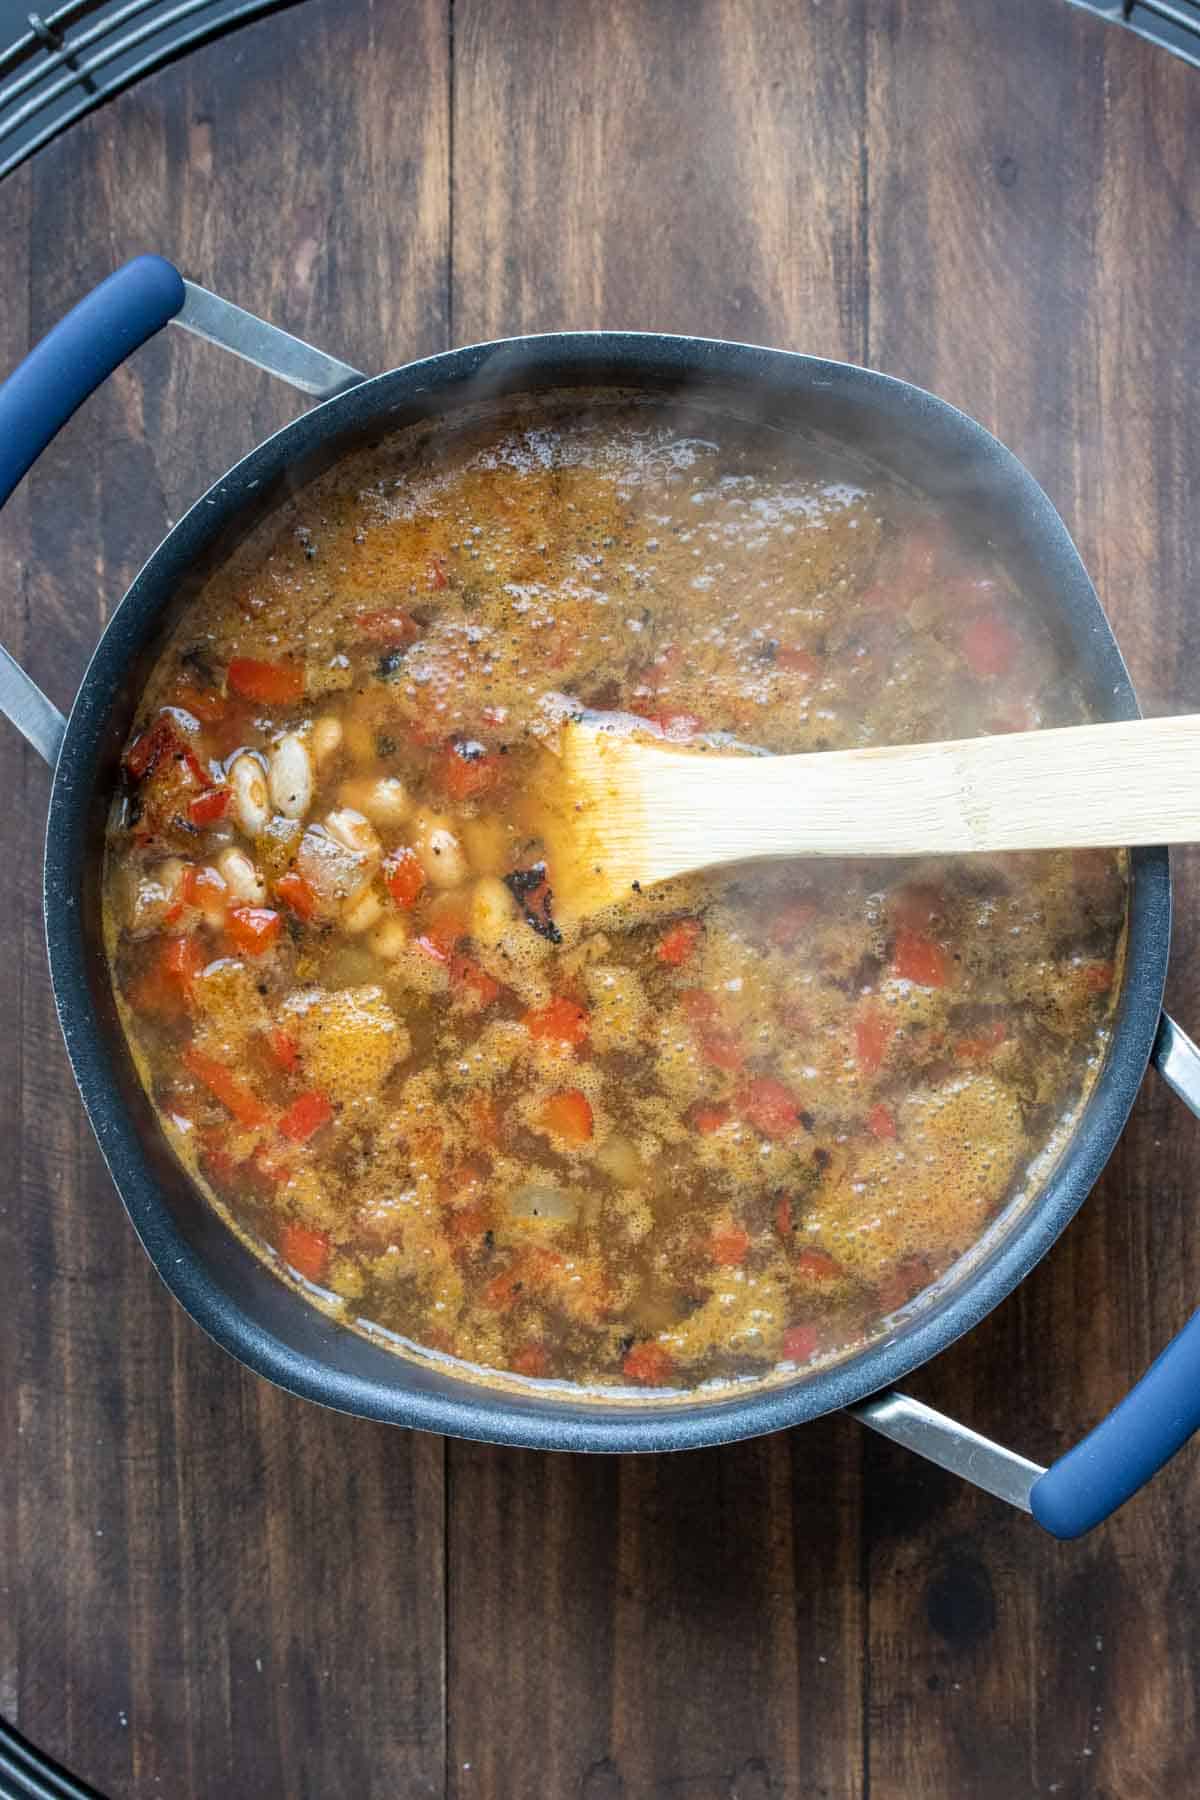 Wooden spoon mixing a pot with broth, dried pinto beans and red pepper pieces